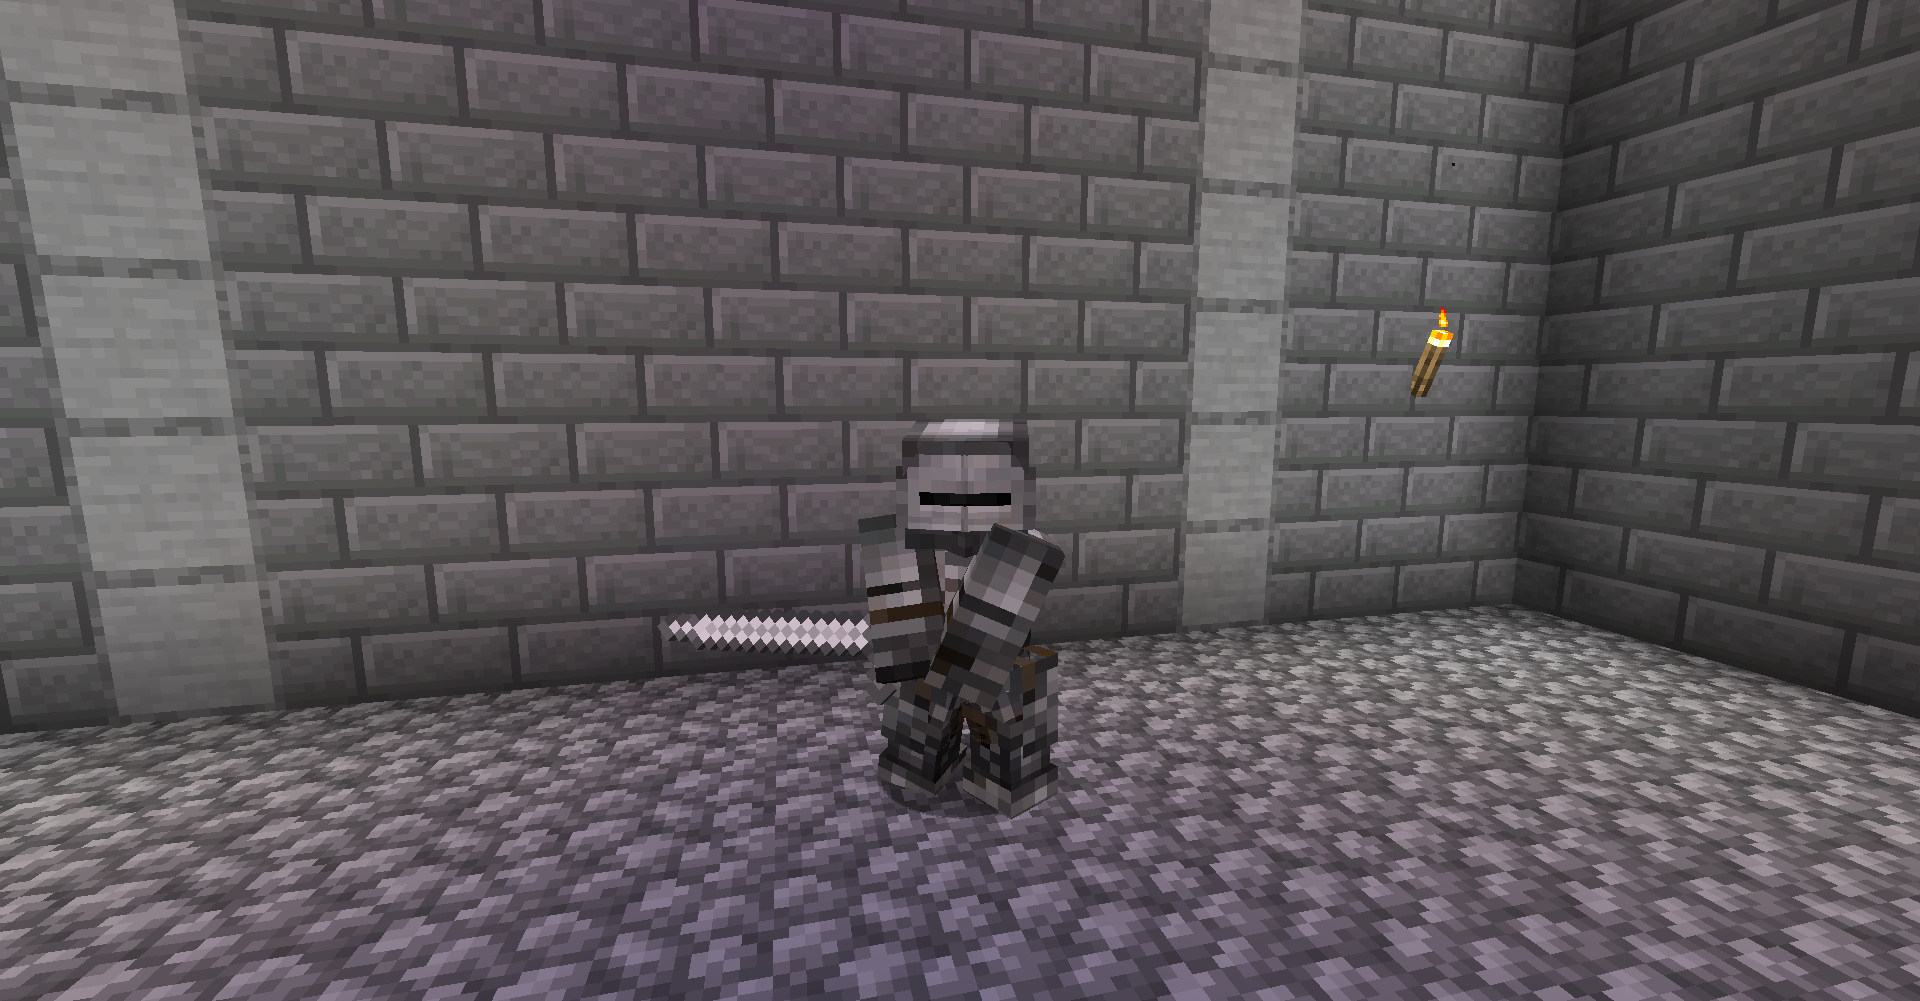 Weapon of minecraft epic fight. Epic Knights Armor and Weapons 1.16.5 крафты. Epic Knights Armor and Weapons 1.16.5. Крафты Epic Knight Armor. Epic Knights: Shields, Armor and Weapons.